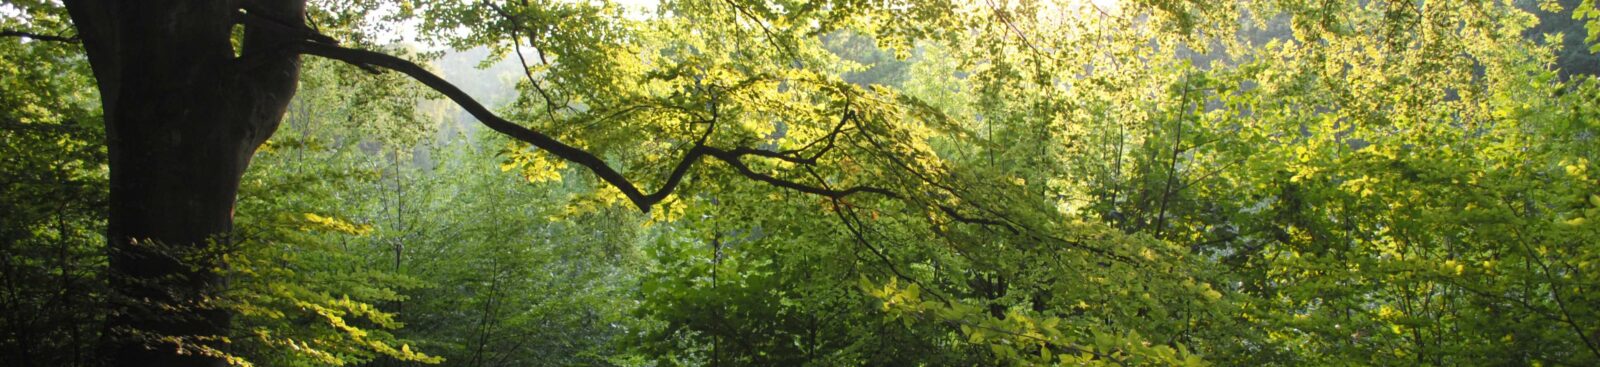 Trees in Denge wood, with sunlight shining through. Green and yellow leaves.